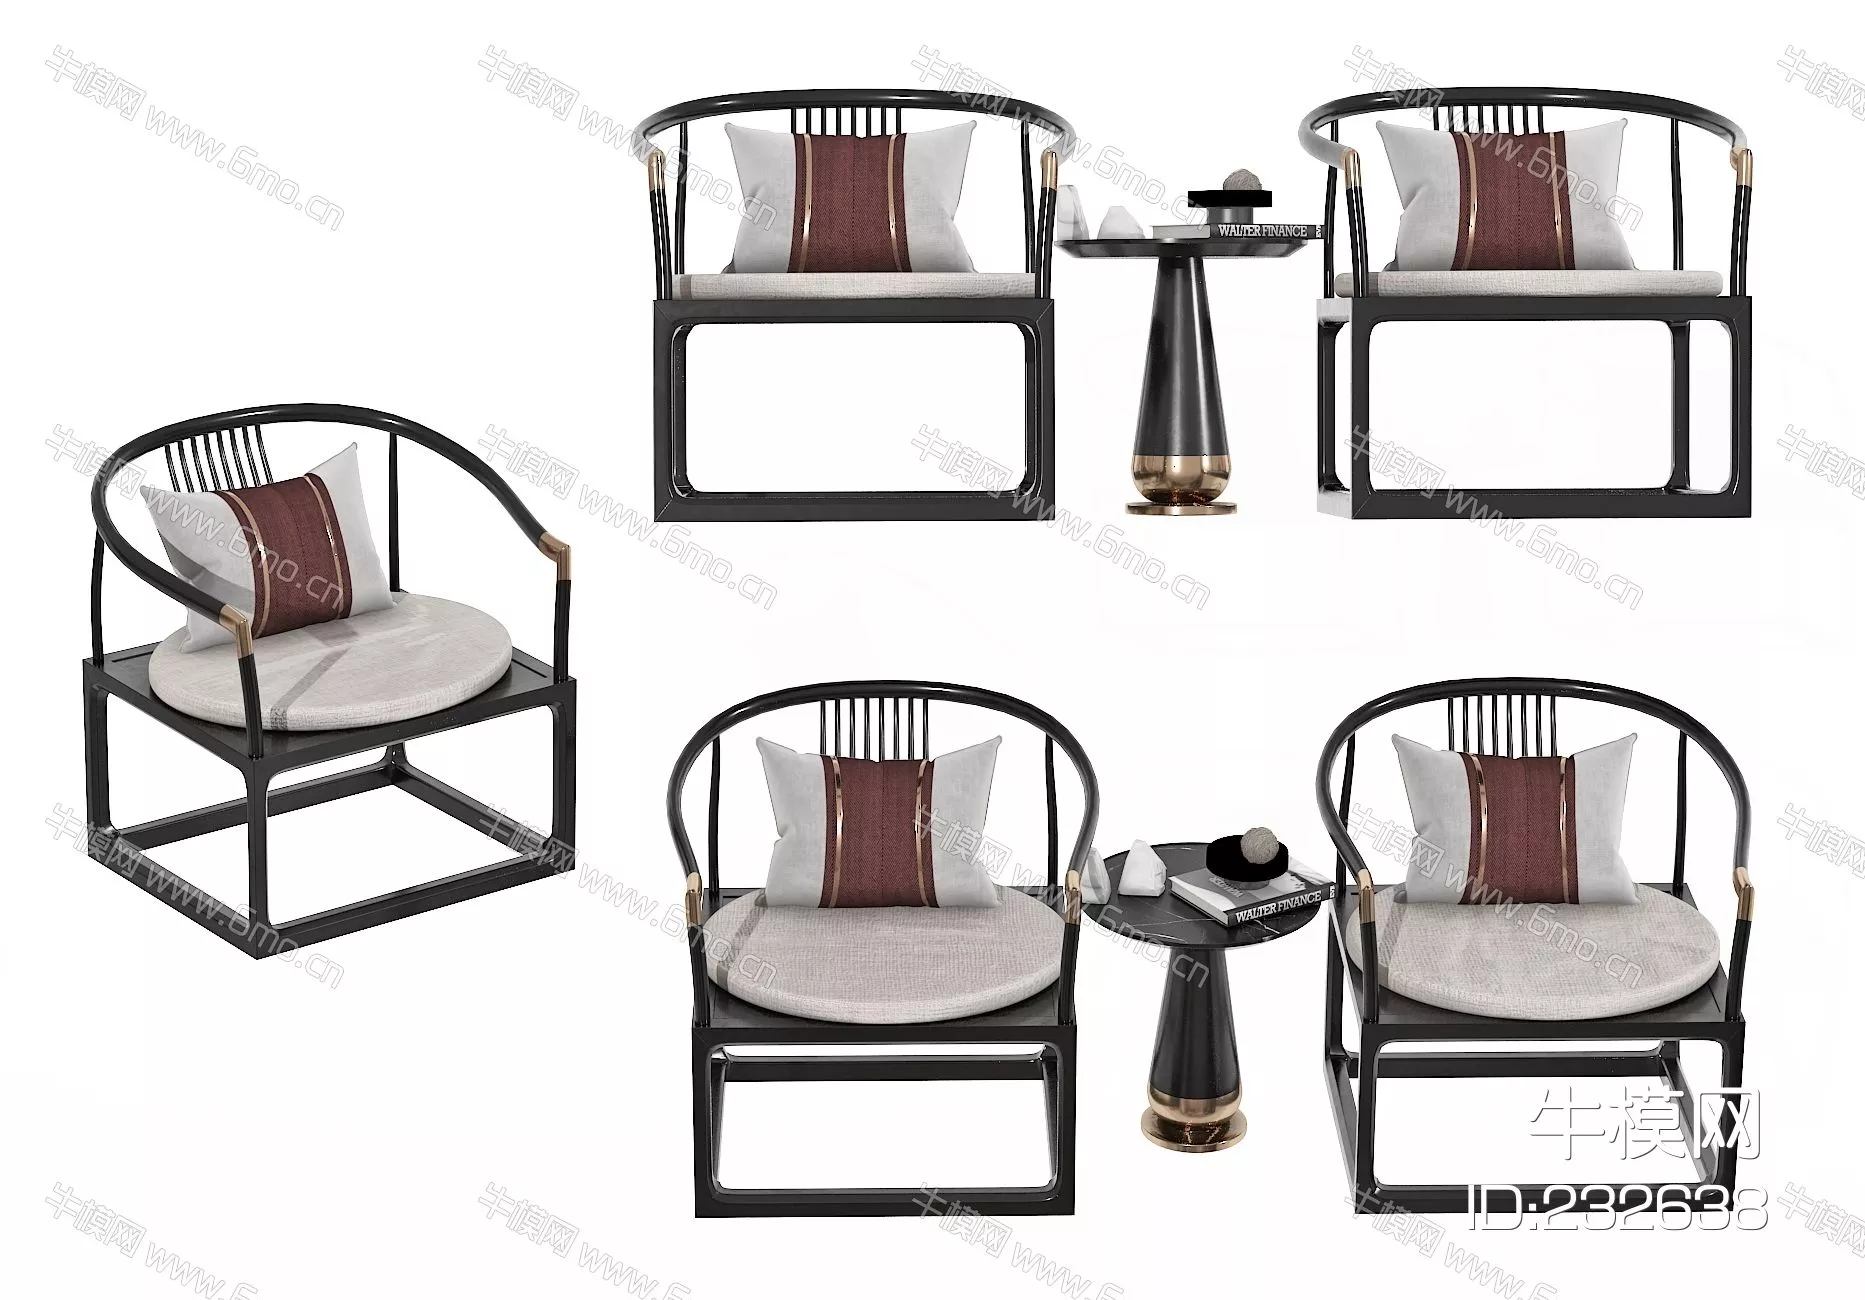 CHINESE LOUNGLE CHAIR - SKETCHUP 3D MODEL - VRAY - 232638